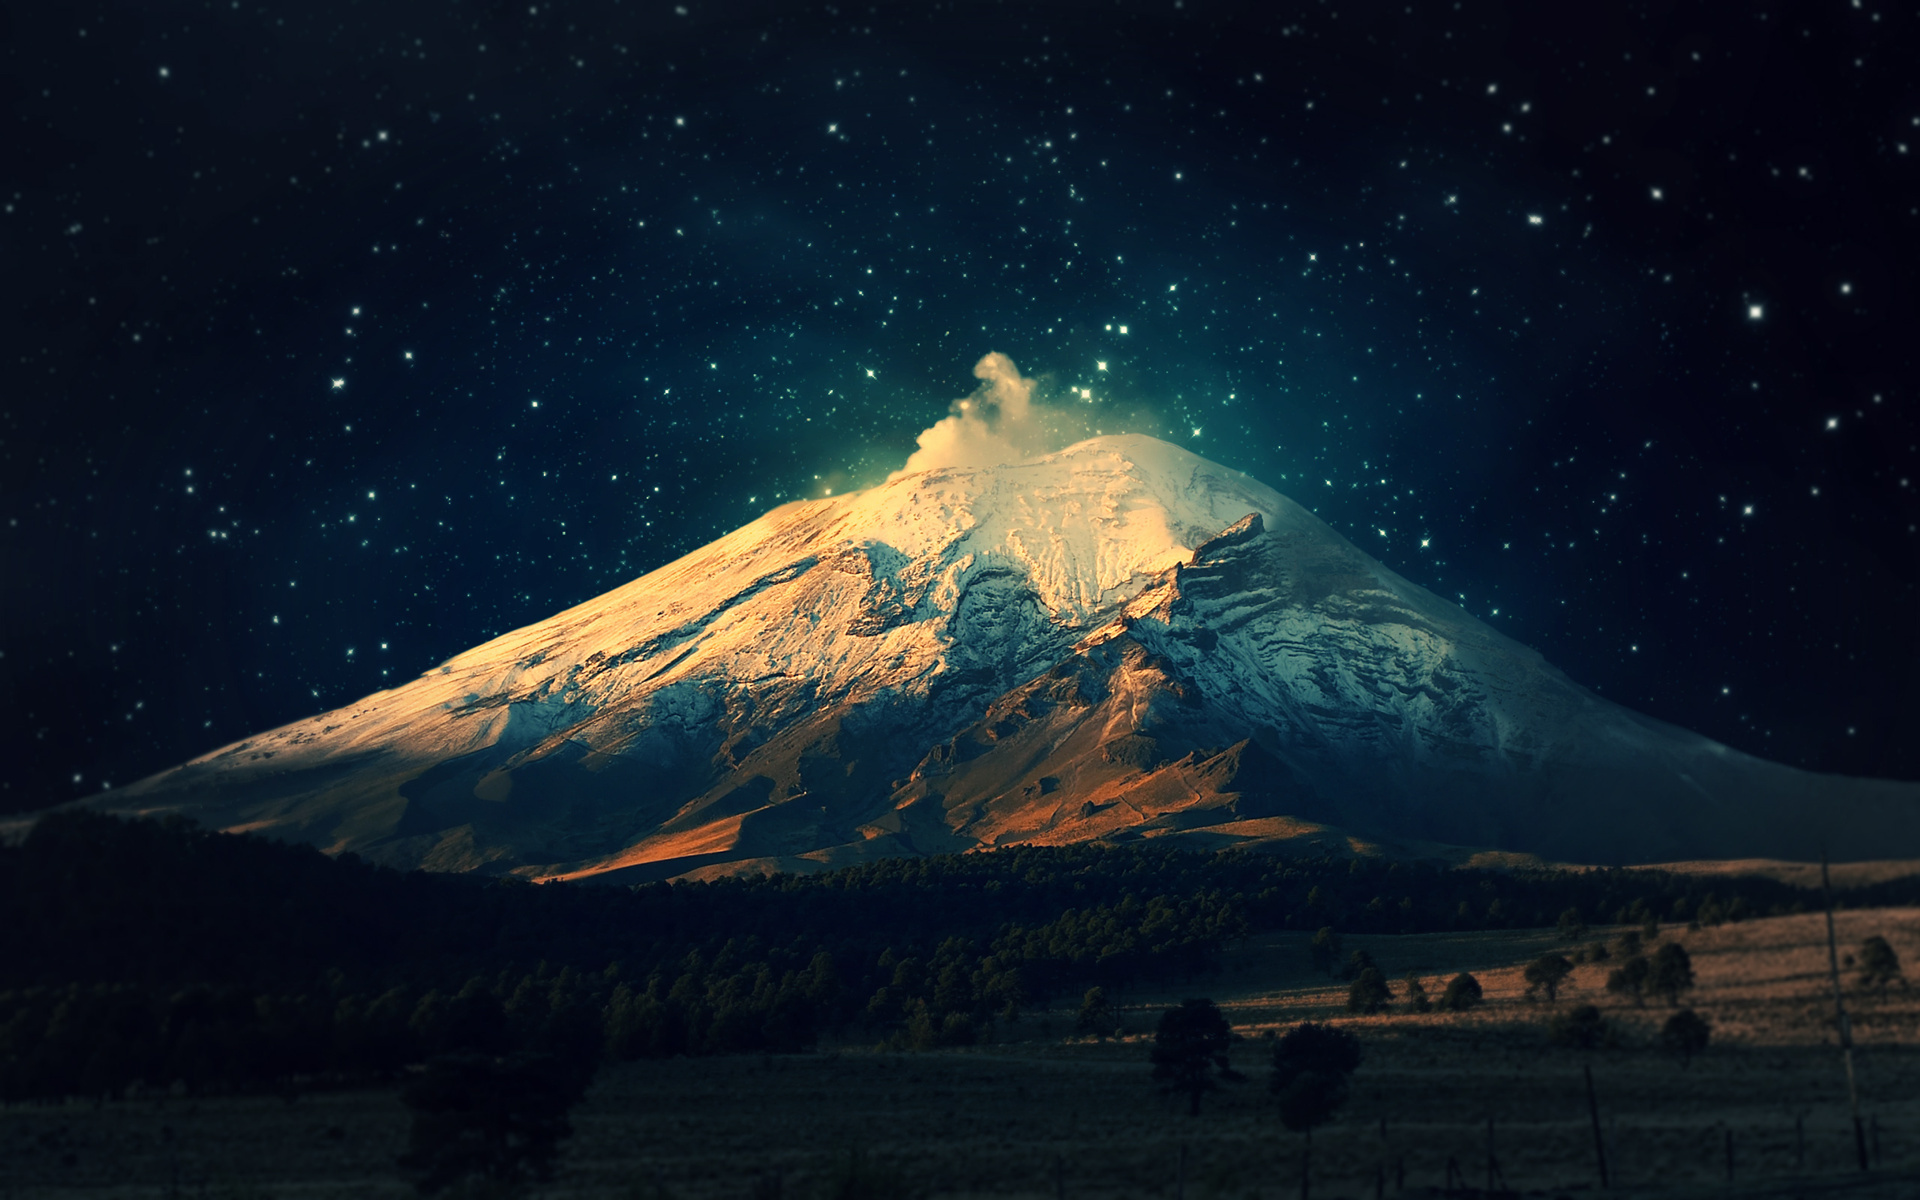 Night Mountain Wallpaper HD | Wallpapers, Backgrounds, Images, Art ...